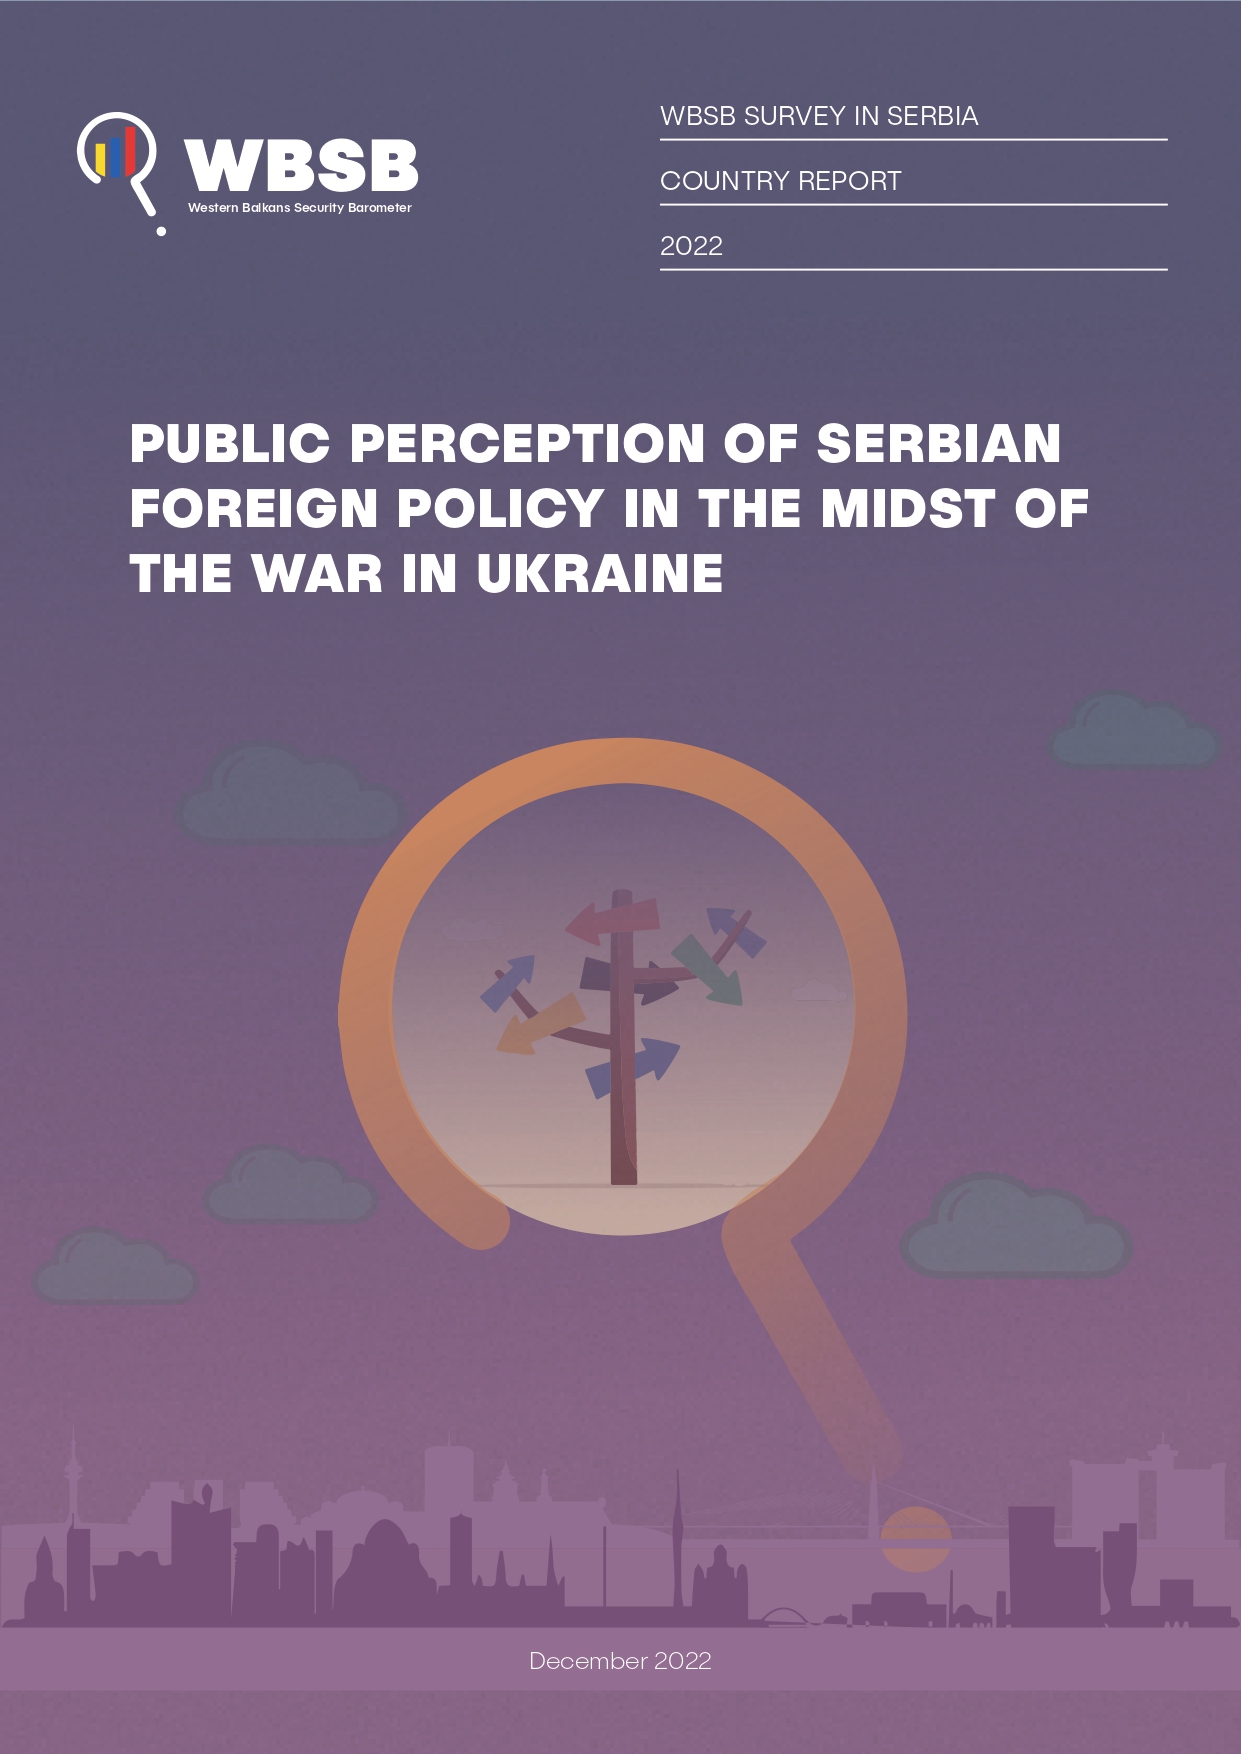 PUBLIC PERCEPTION OF SERBIAN FOREIGN POLICY IN THE MIDST OF THE WAR IN UKRAINE